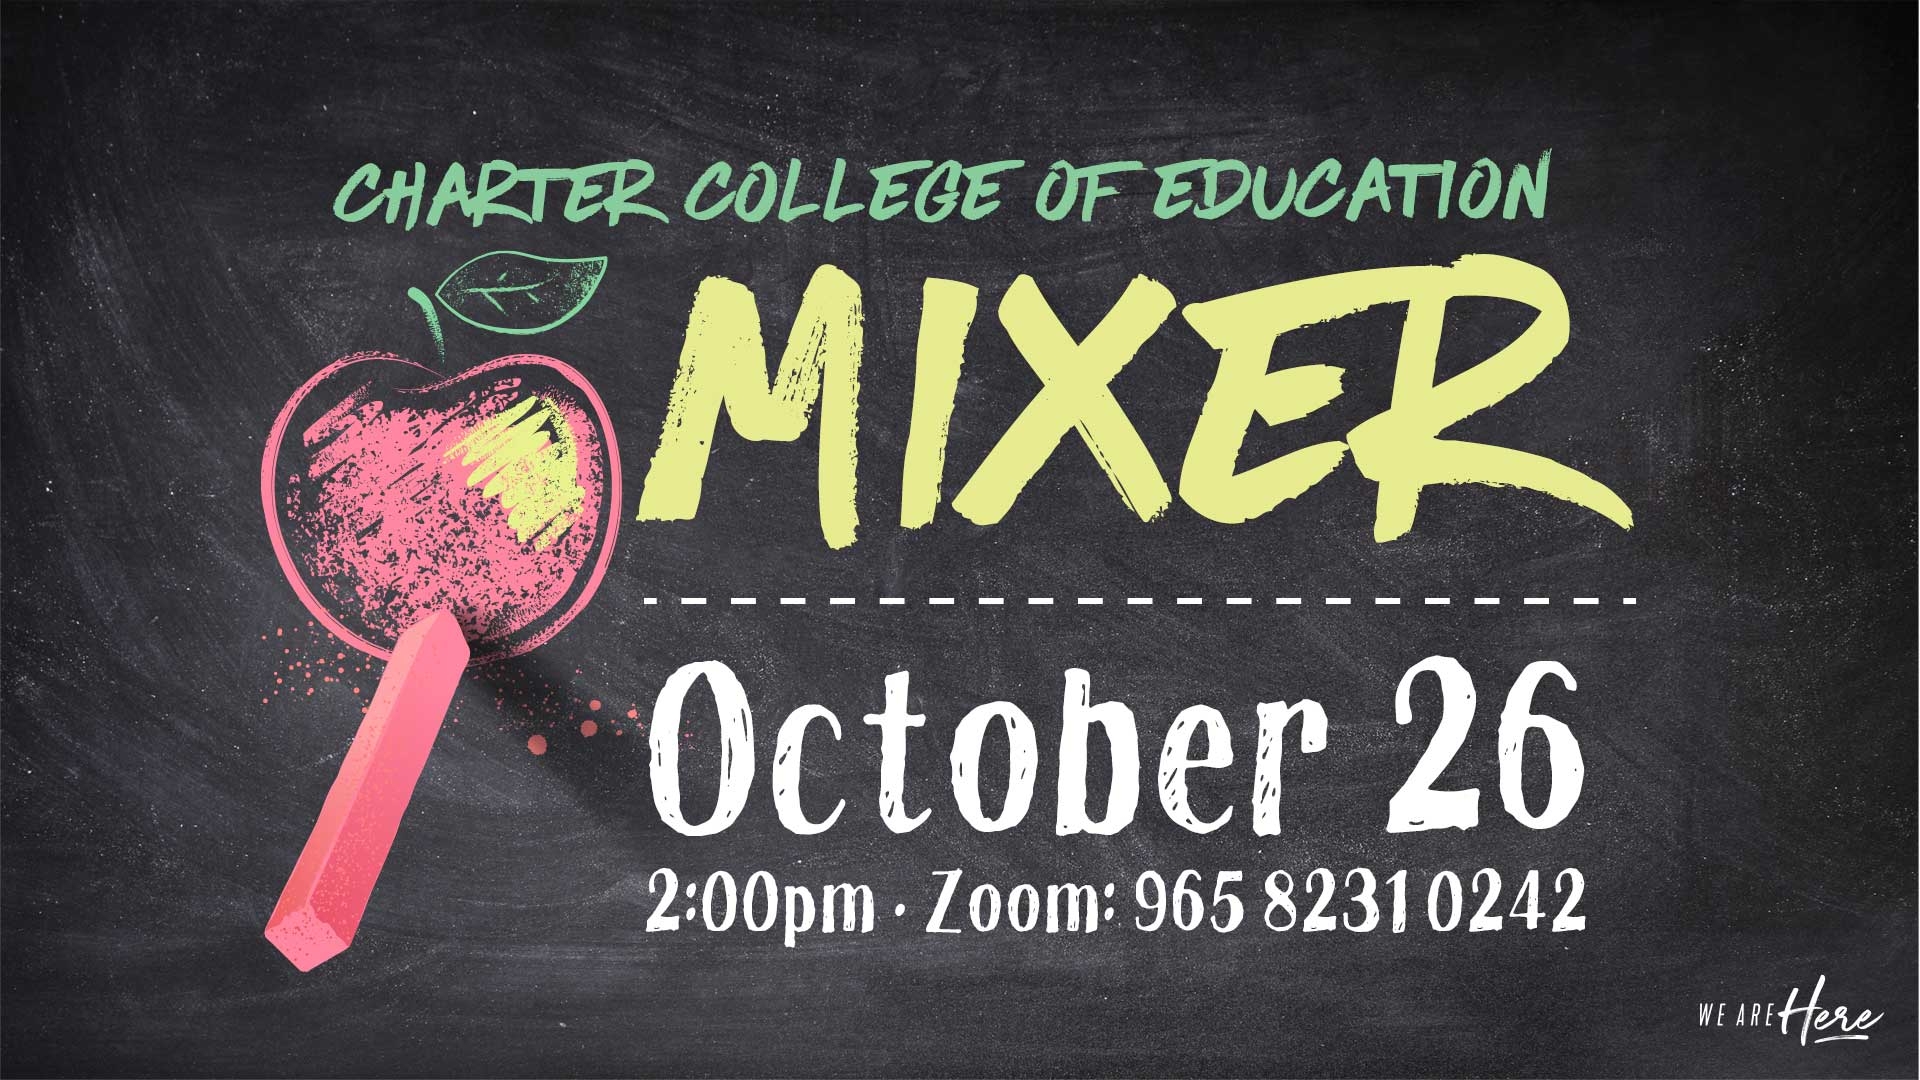 Charter College of Education Mixer